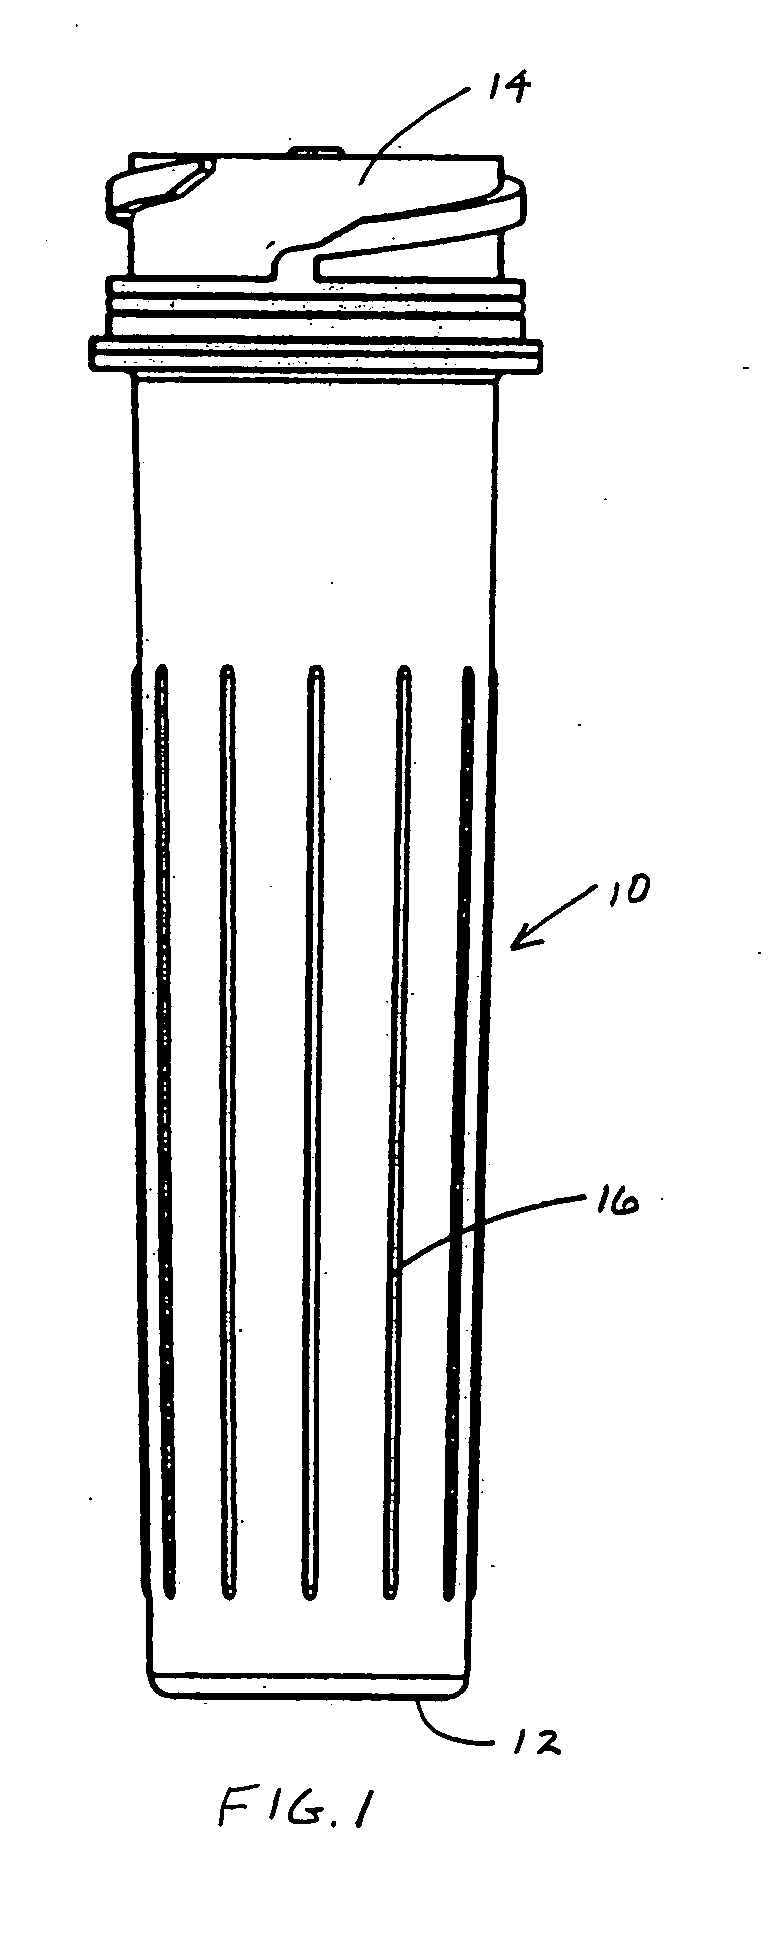 Power source and electronic device assembly